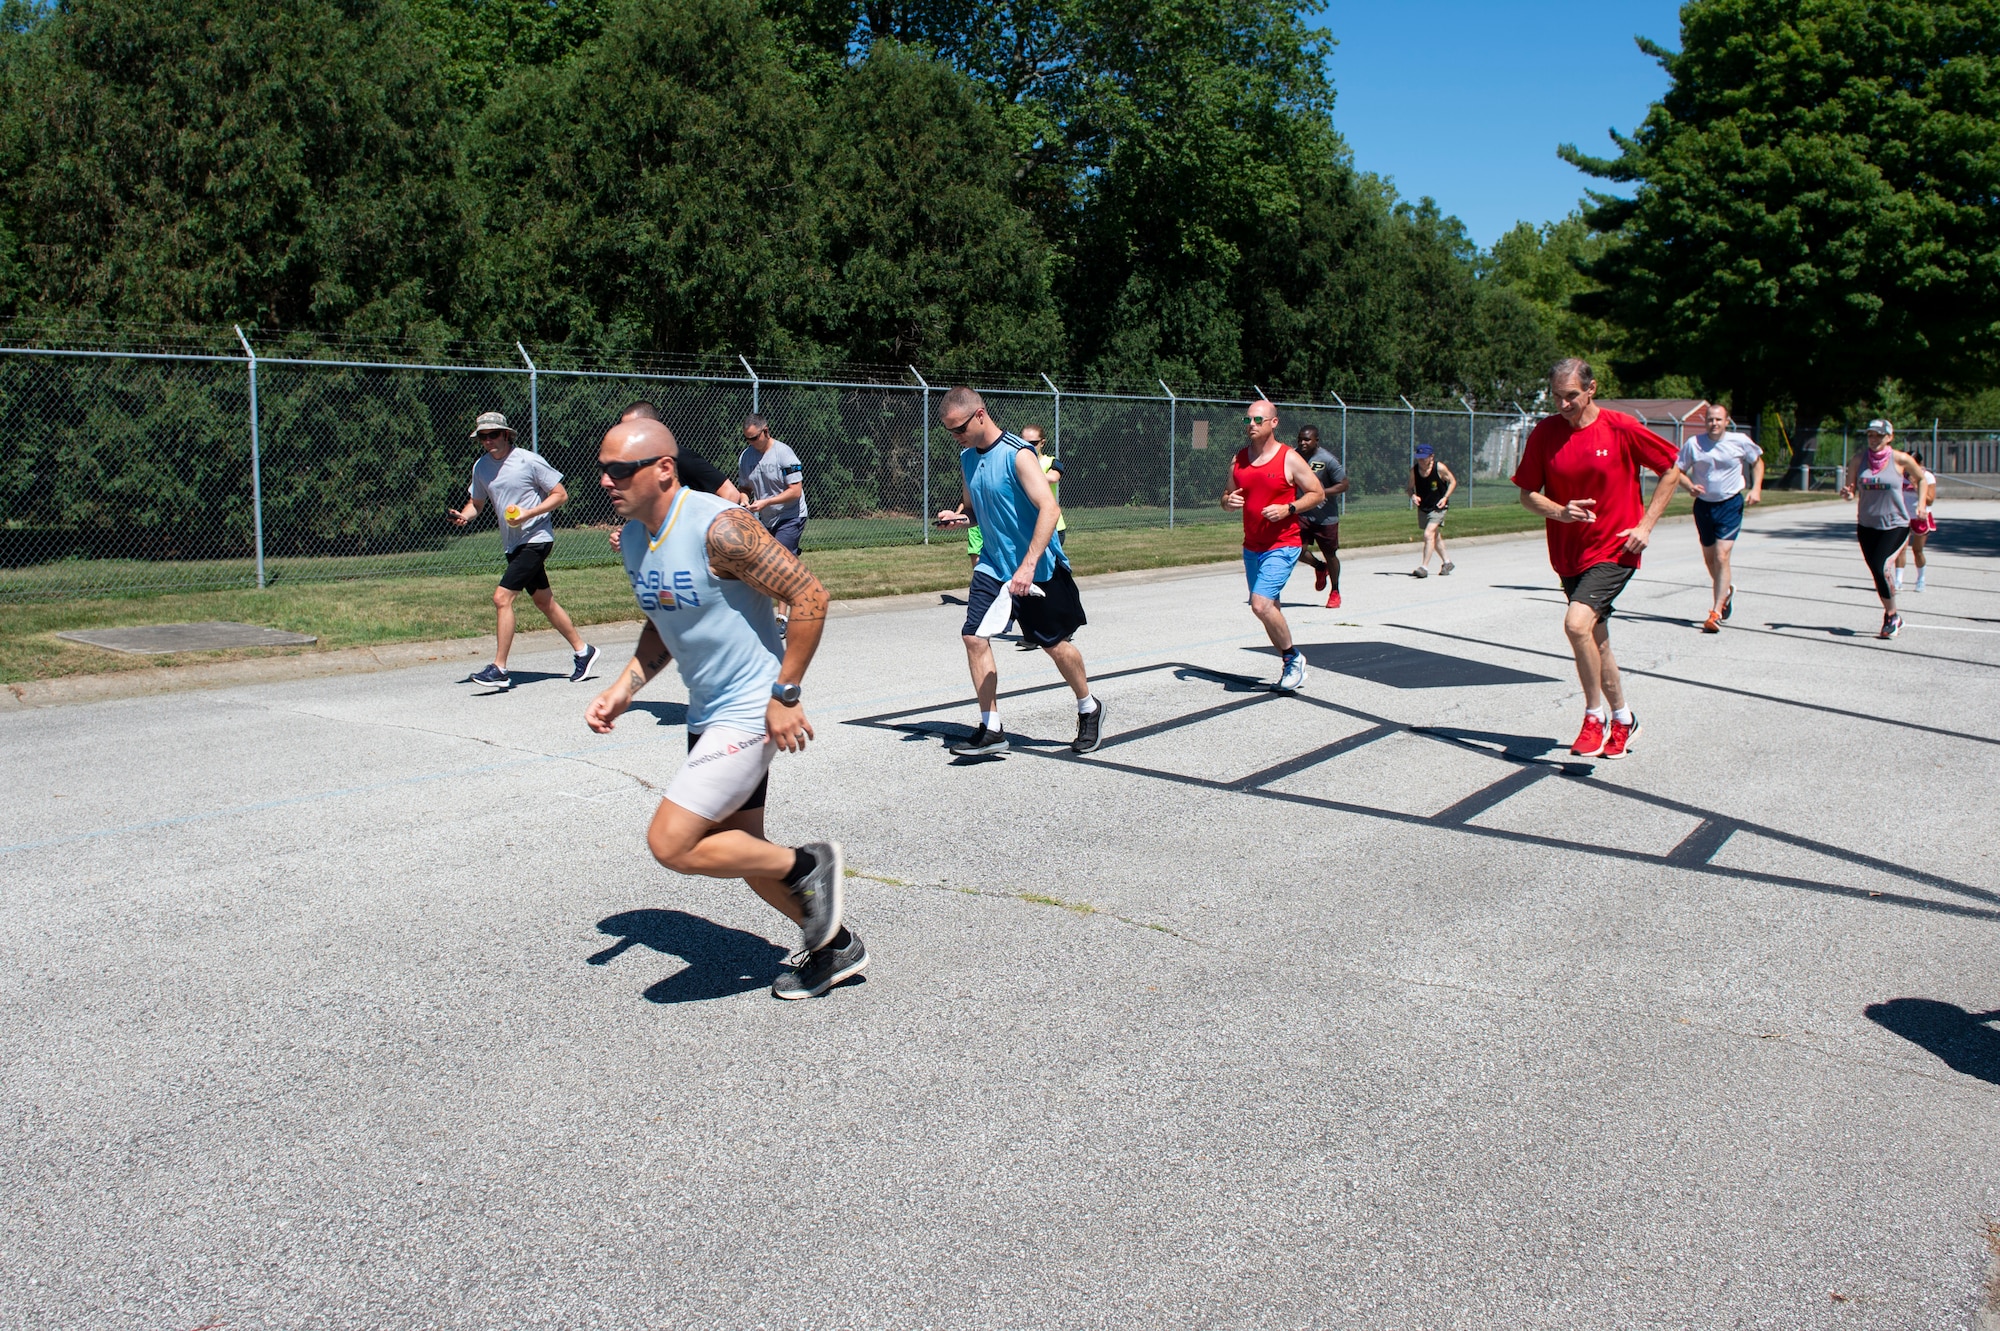 Participants start to run during the Dog Days of Summer 5K at Grissom Air Reserve Base, Indiana, July 29, 2020. Senior Airman Jeremiah Oden, 434th Operation Support Squadron survival, evasion, resistance, and escape specialist, finished first in the race. (U.S. Air Force photo by Senior Airman Michael Hunsaker)